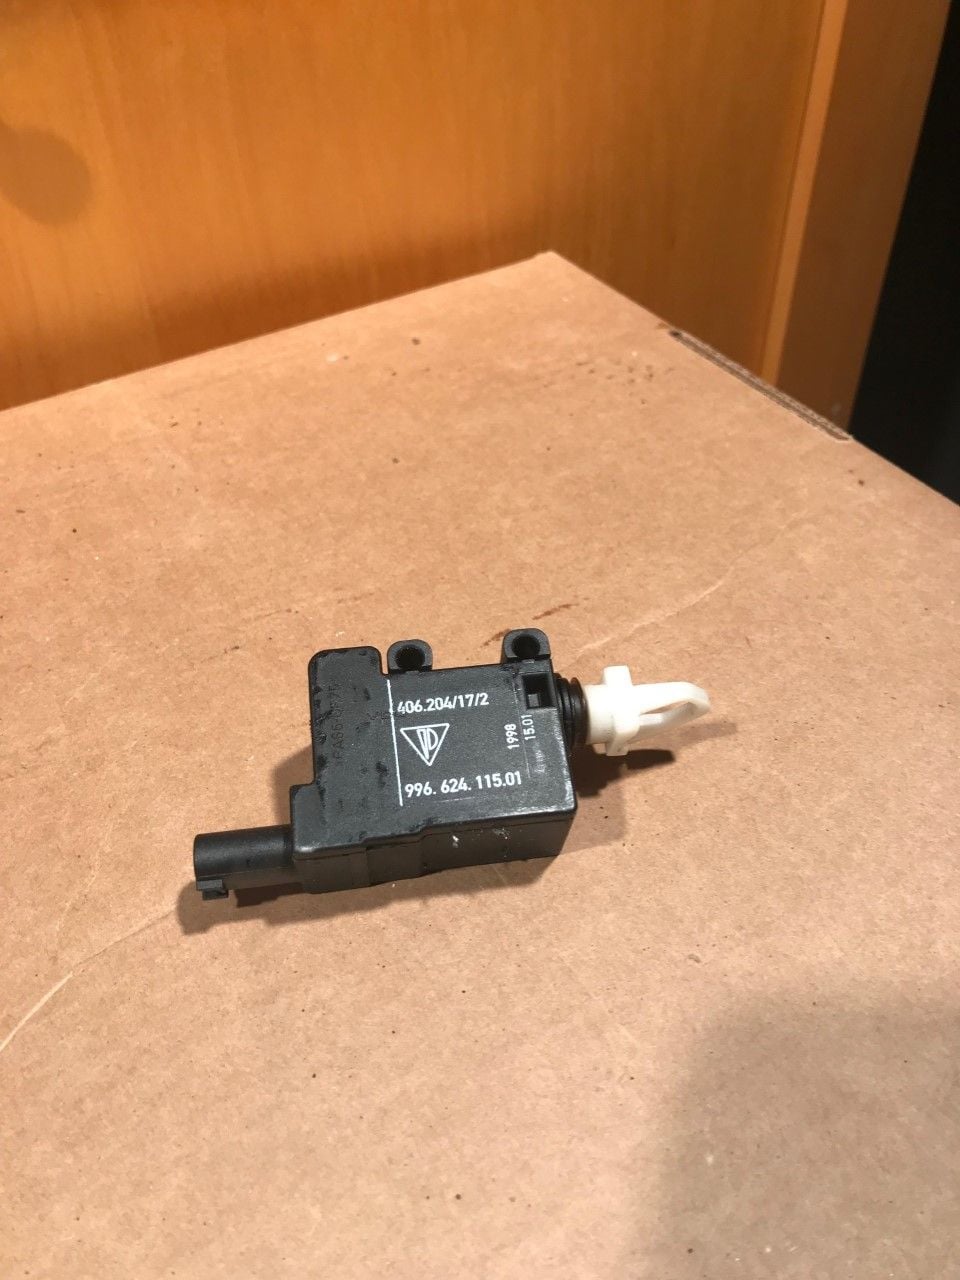 2000 Porsche 911 - 996 624 115 01 Door Sill Actuator - Accessories - $5 - Plainview, NY 11803, United States